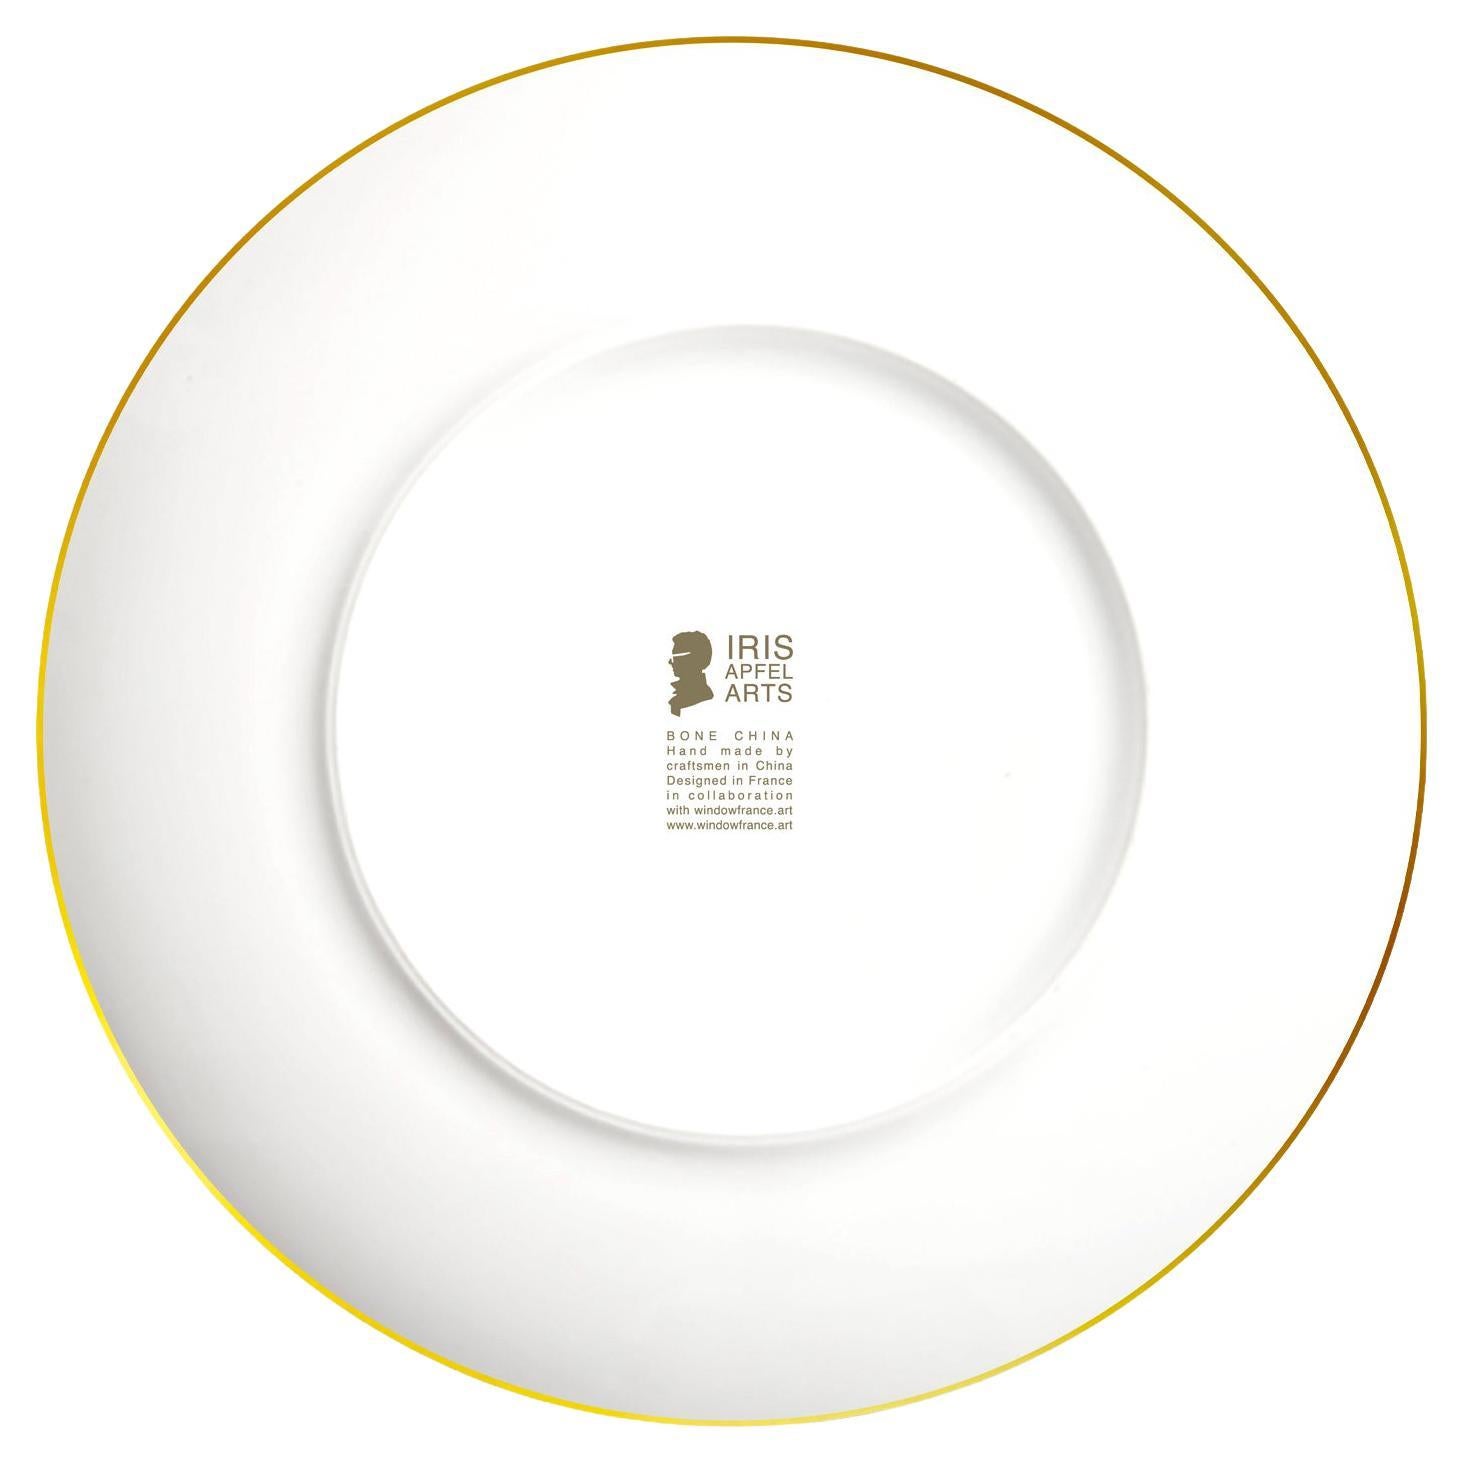 This sleek, classic set of starter plates are the perfect mix of versatility and luxury. Used either in tandem with other Iris Apfel plate designs or on their own, these plates are the perfect touch for your next dinner party.